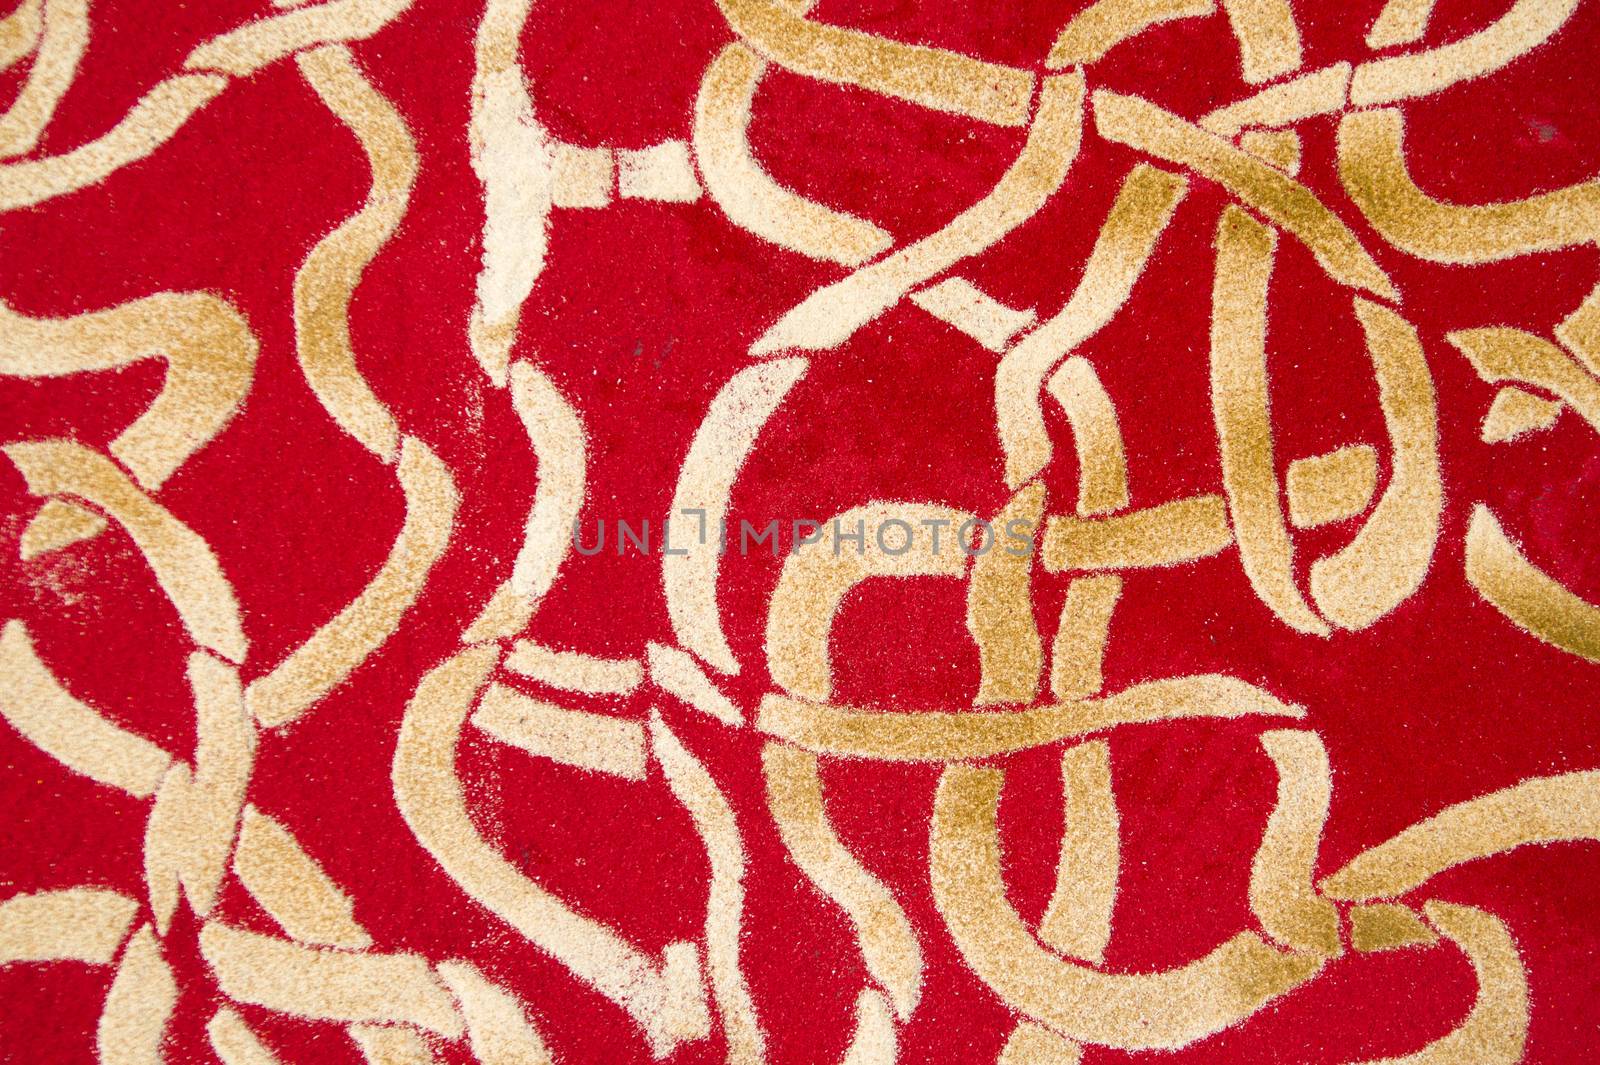 Small details of colored carpets performed with the use of wood sawdust